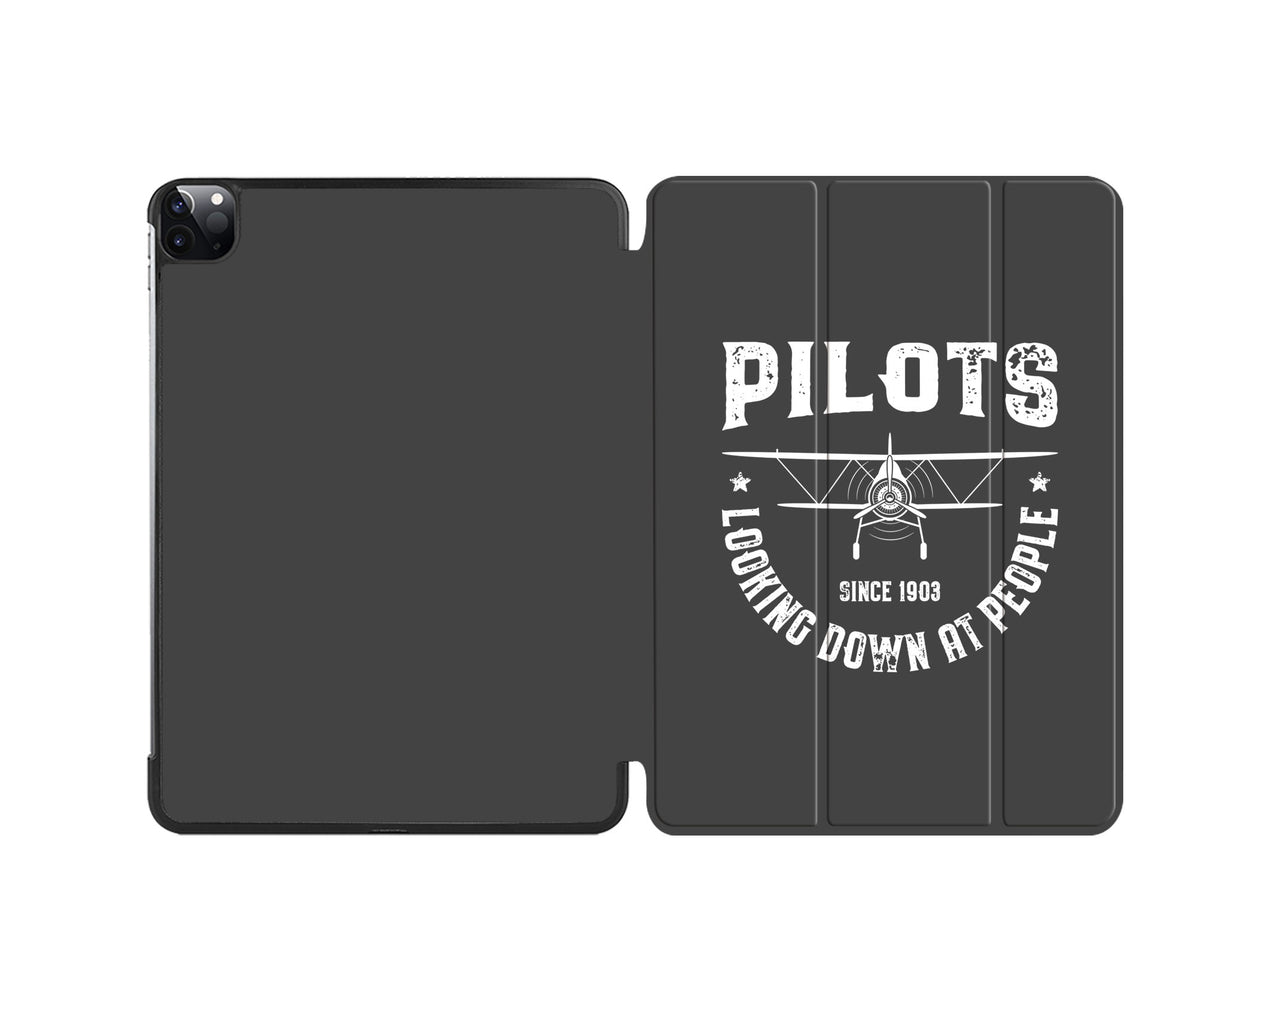 Pilots Looking Down at People Since 1903 Designed iPad Cases